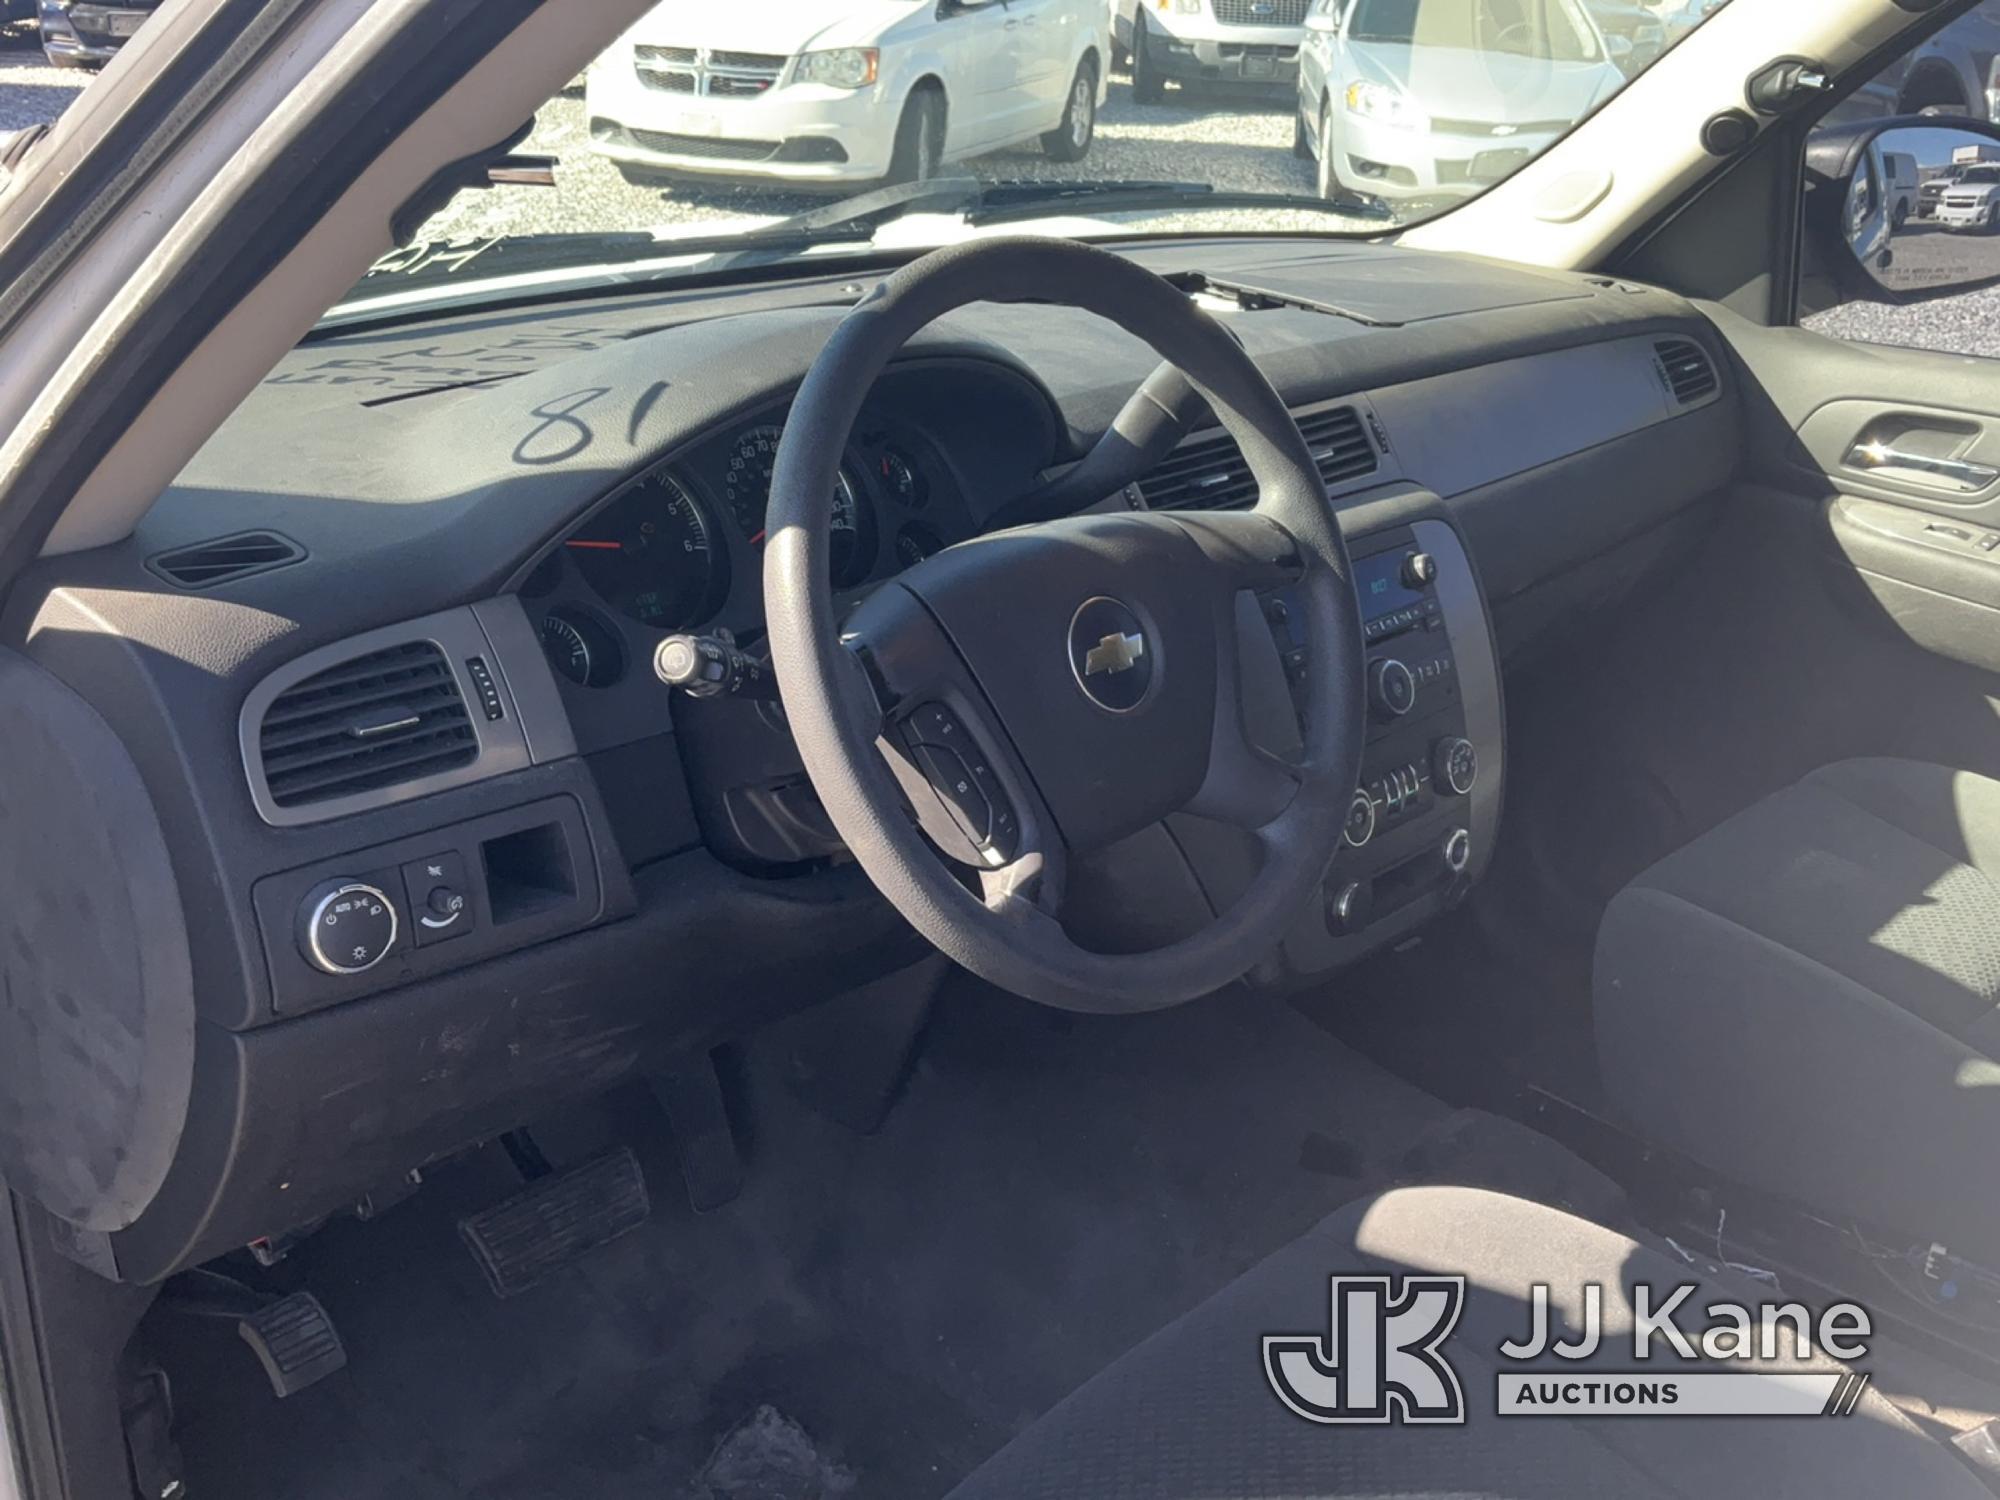 (Las Vegas, NV) 2008 Chevrolet Tahoe Police Package Interior Damage, No Console, Rear Seats Unsecure